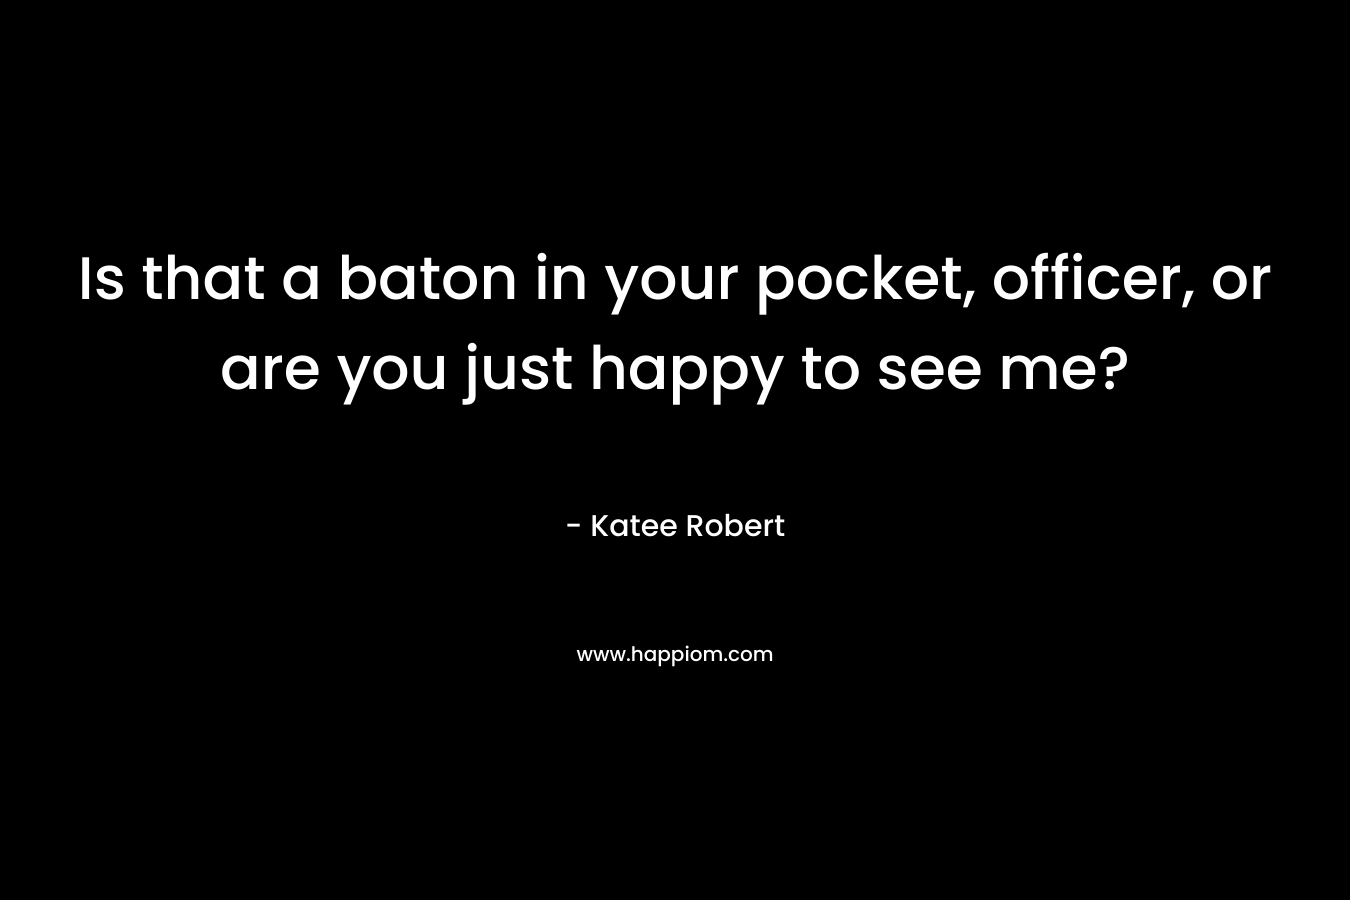 Is that a baton in your pocket, officer, or are you just happy to see me? – Katee Robert